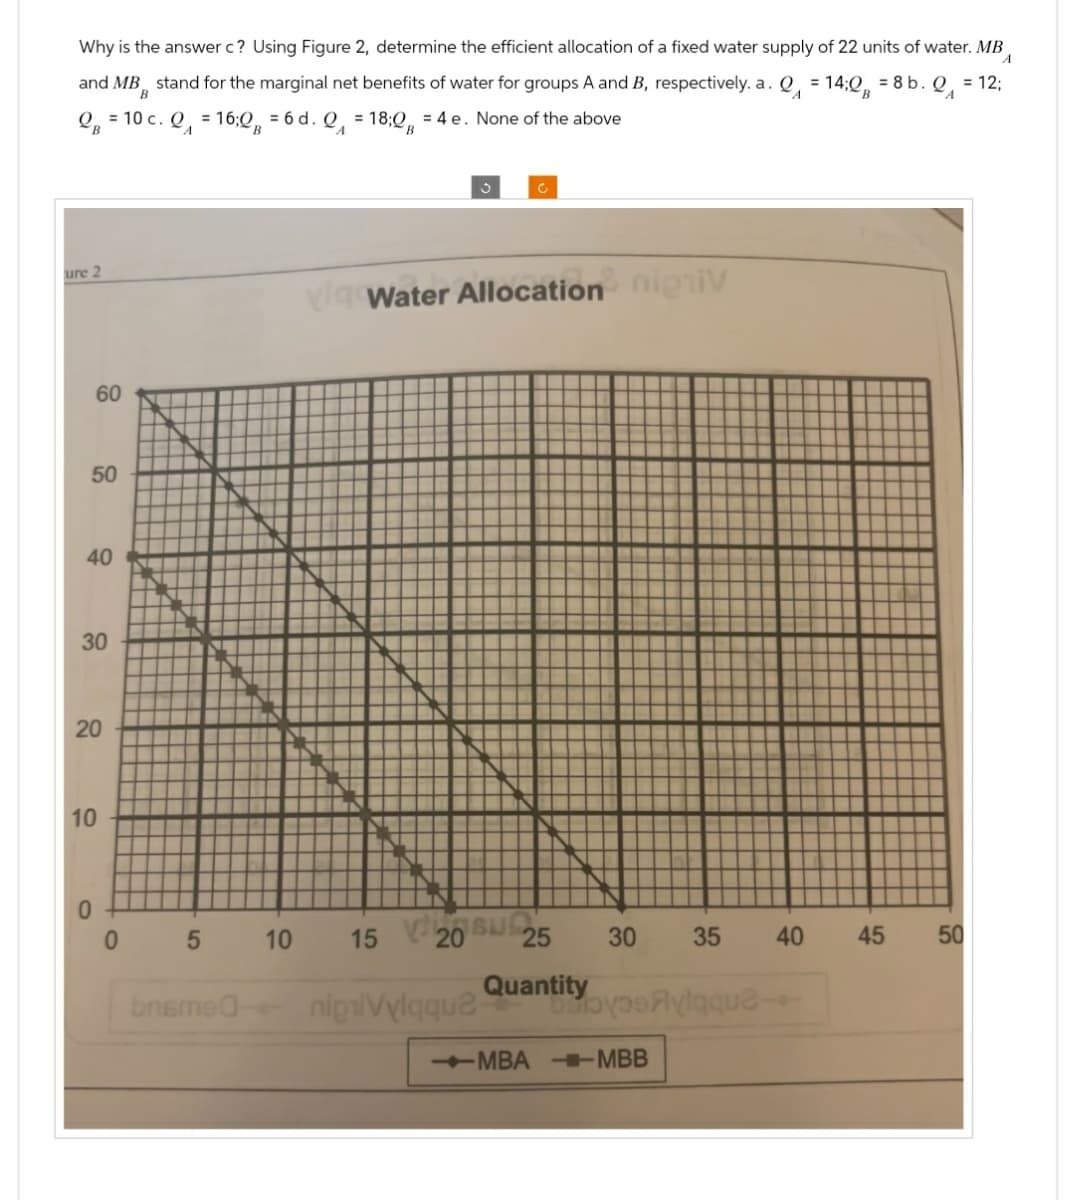 Why is the answer c? Using Figure 2, determine the efficient allocation of a fixed water supply of 22 units of water. MB
and MB stand for the marginal net benefits of water for groups A and B, respectively. a. Q = 14;QB
= 8 b.
= 12;
= 16;Q = 6d. Q = 18;0 = 4 e. None of the above
B=10c.
A
A
C
c
ure 2
Water Allocation nipiv
60
60
50
50
40
40
30
20
20
10
0
0 5 10
15 V20 SUG
25 30
35 40
40
bnsmea
Quantity
nigniVylqque
BoysFlylaque-
-MBA MBB
45
50